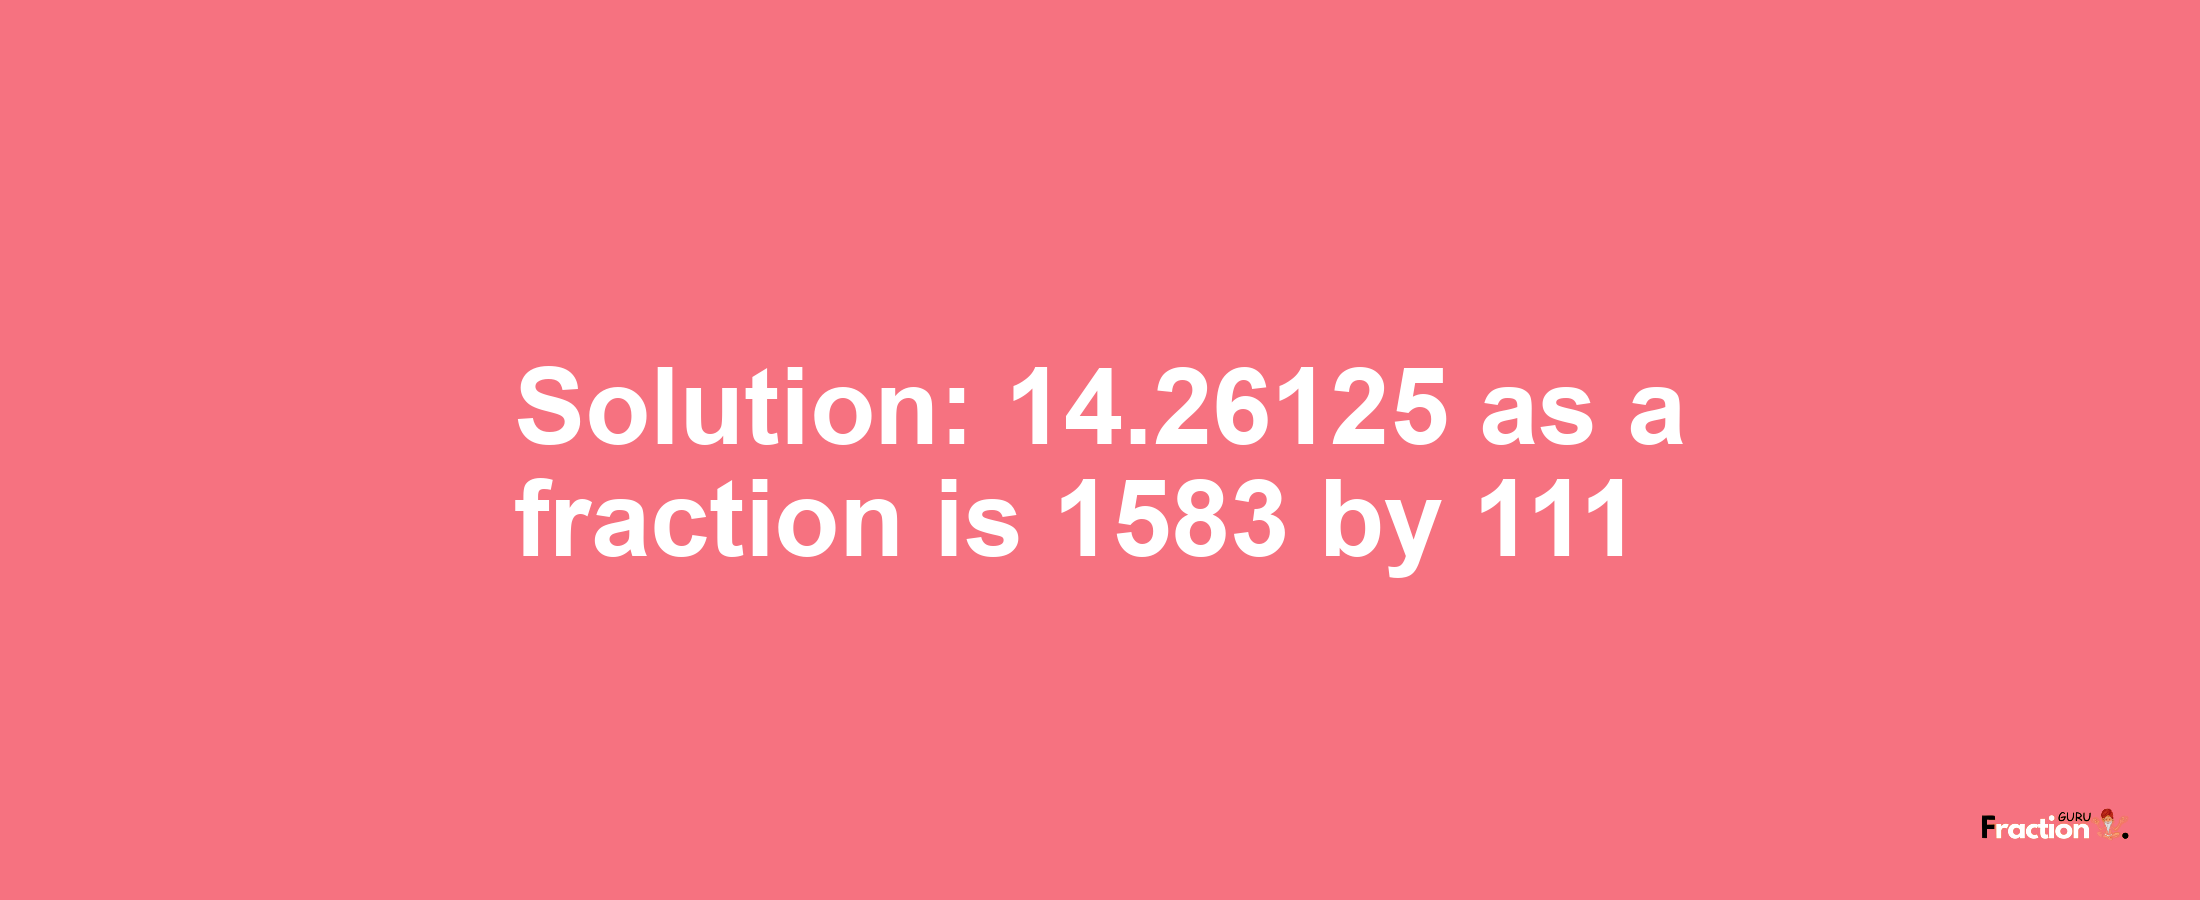 Solution:14.26125 as a fraction is 1583/111